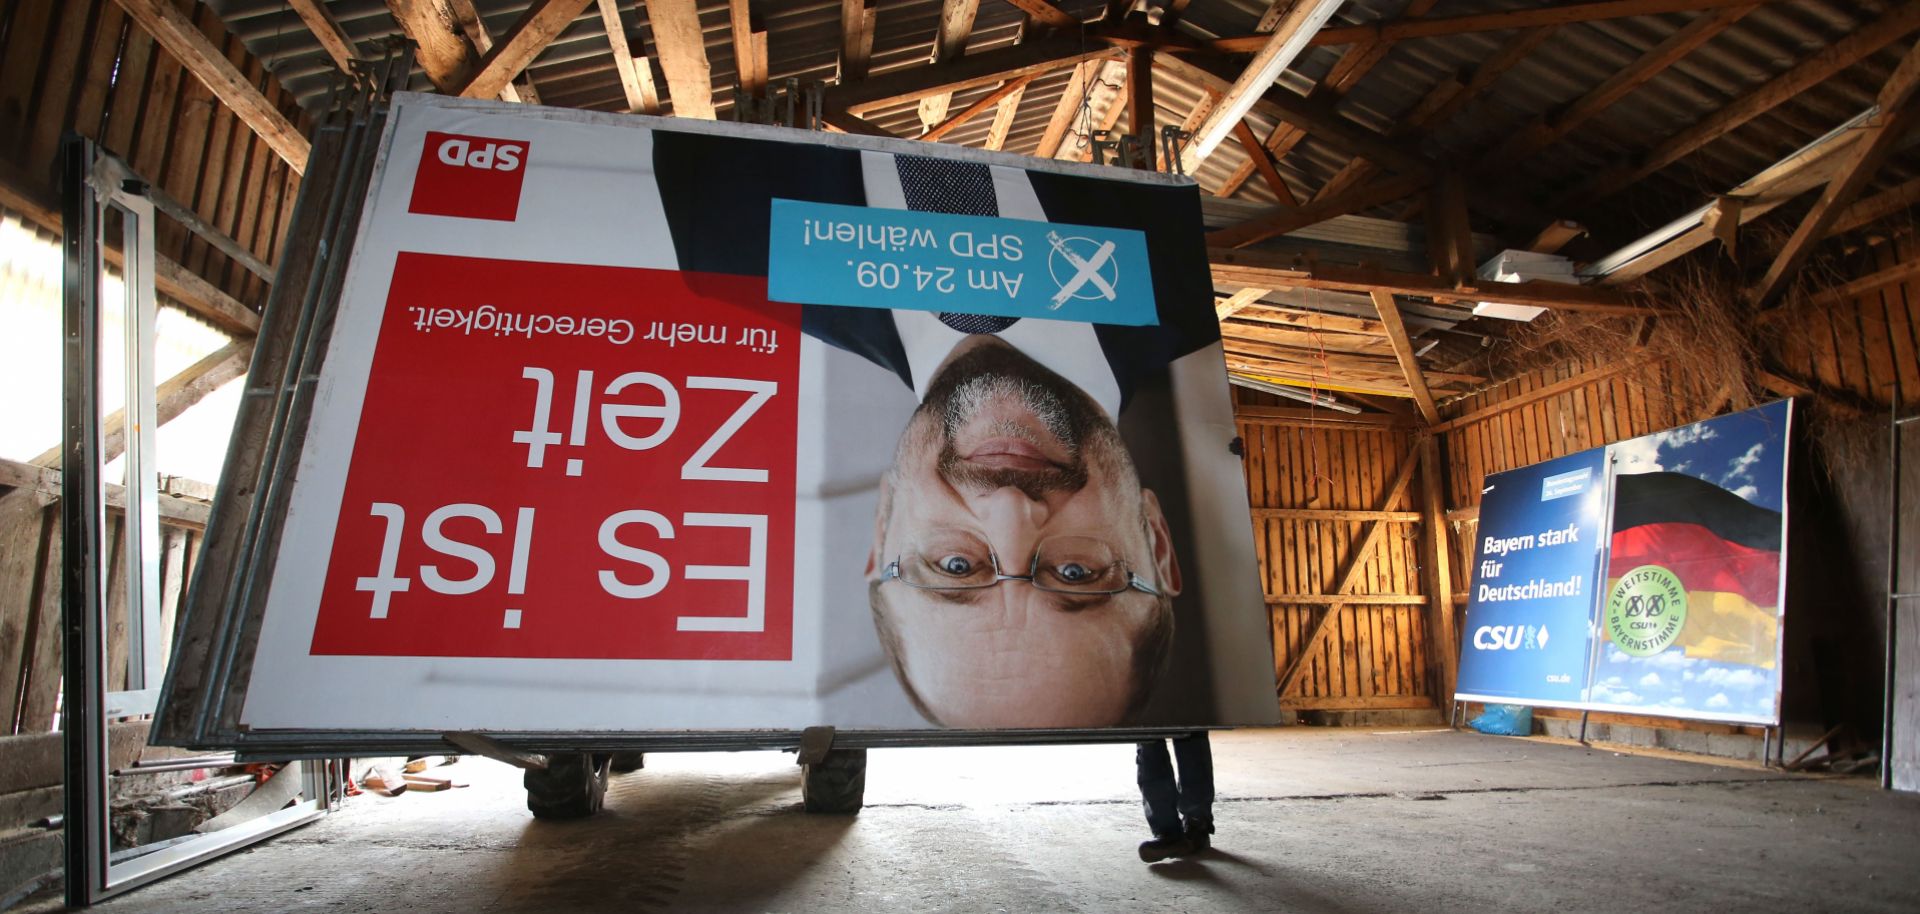 A disassembled election billboard of Martin Schulz, leader of Germany's Social Democratic Party. The SPD won only 20 percent of the vote in Germany's Sept. 24 federal elections.